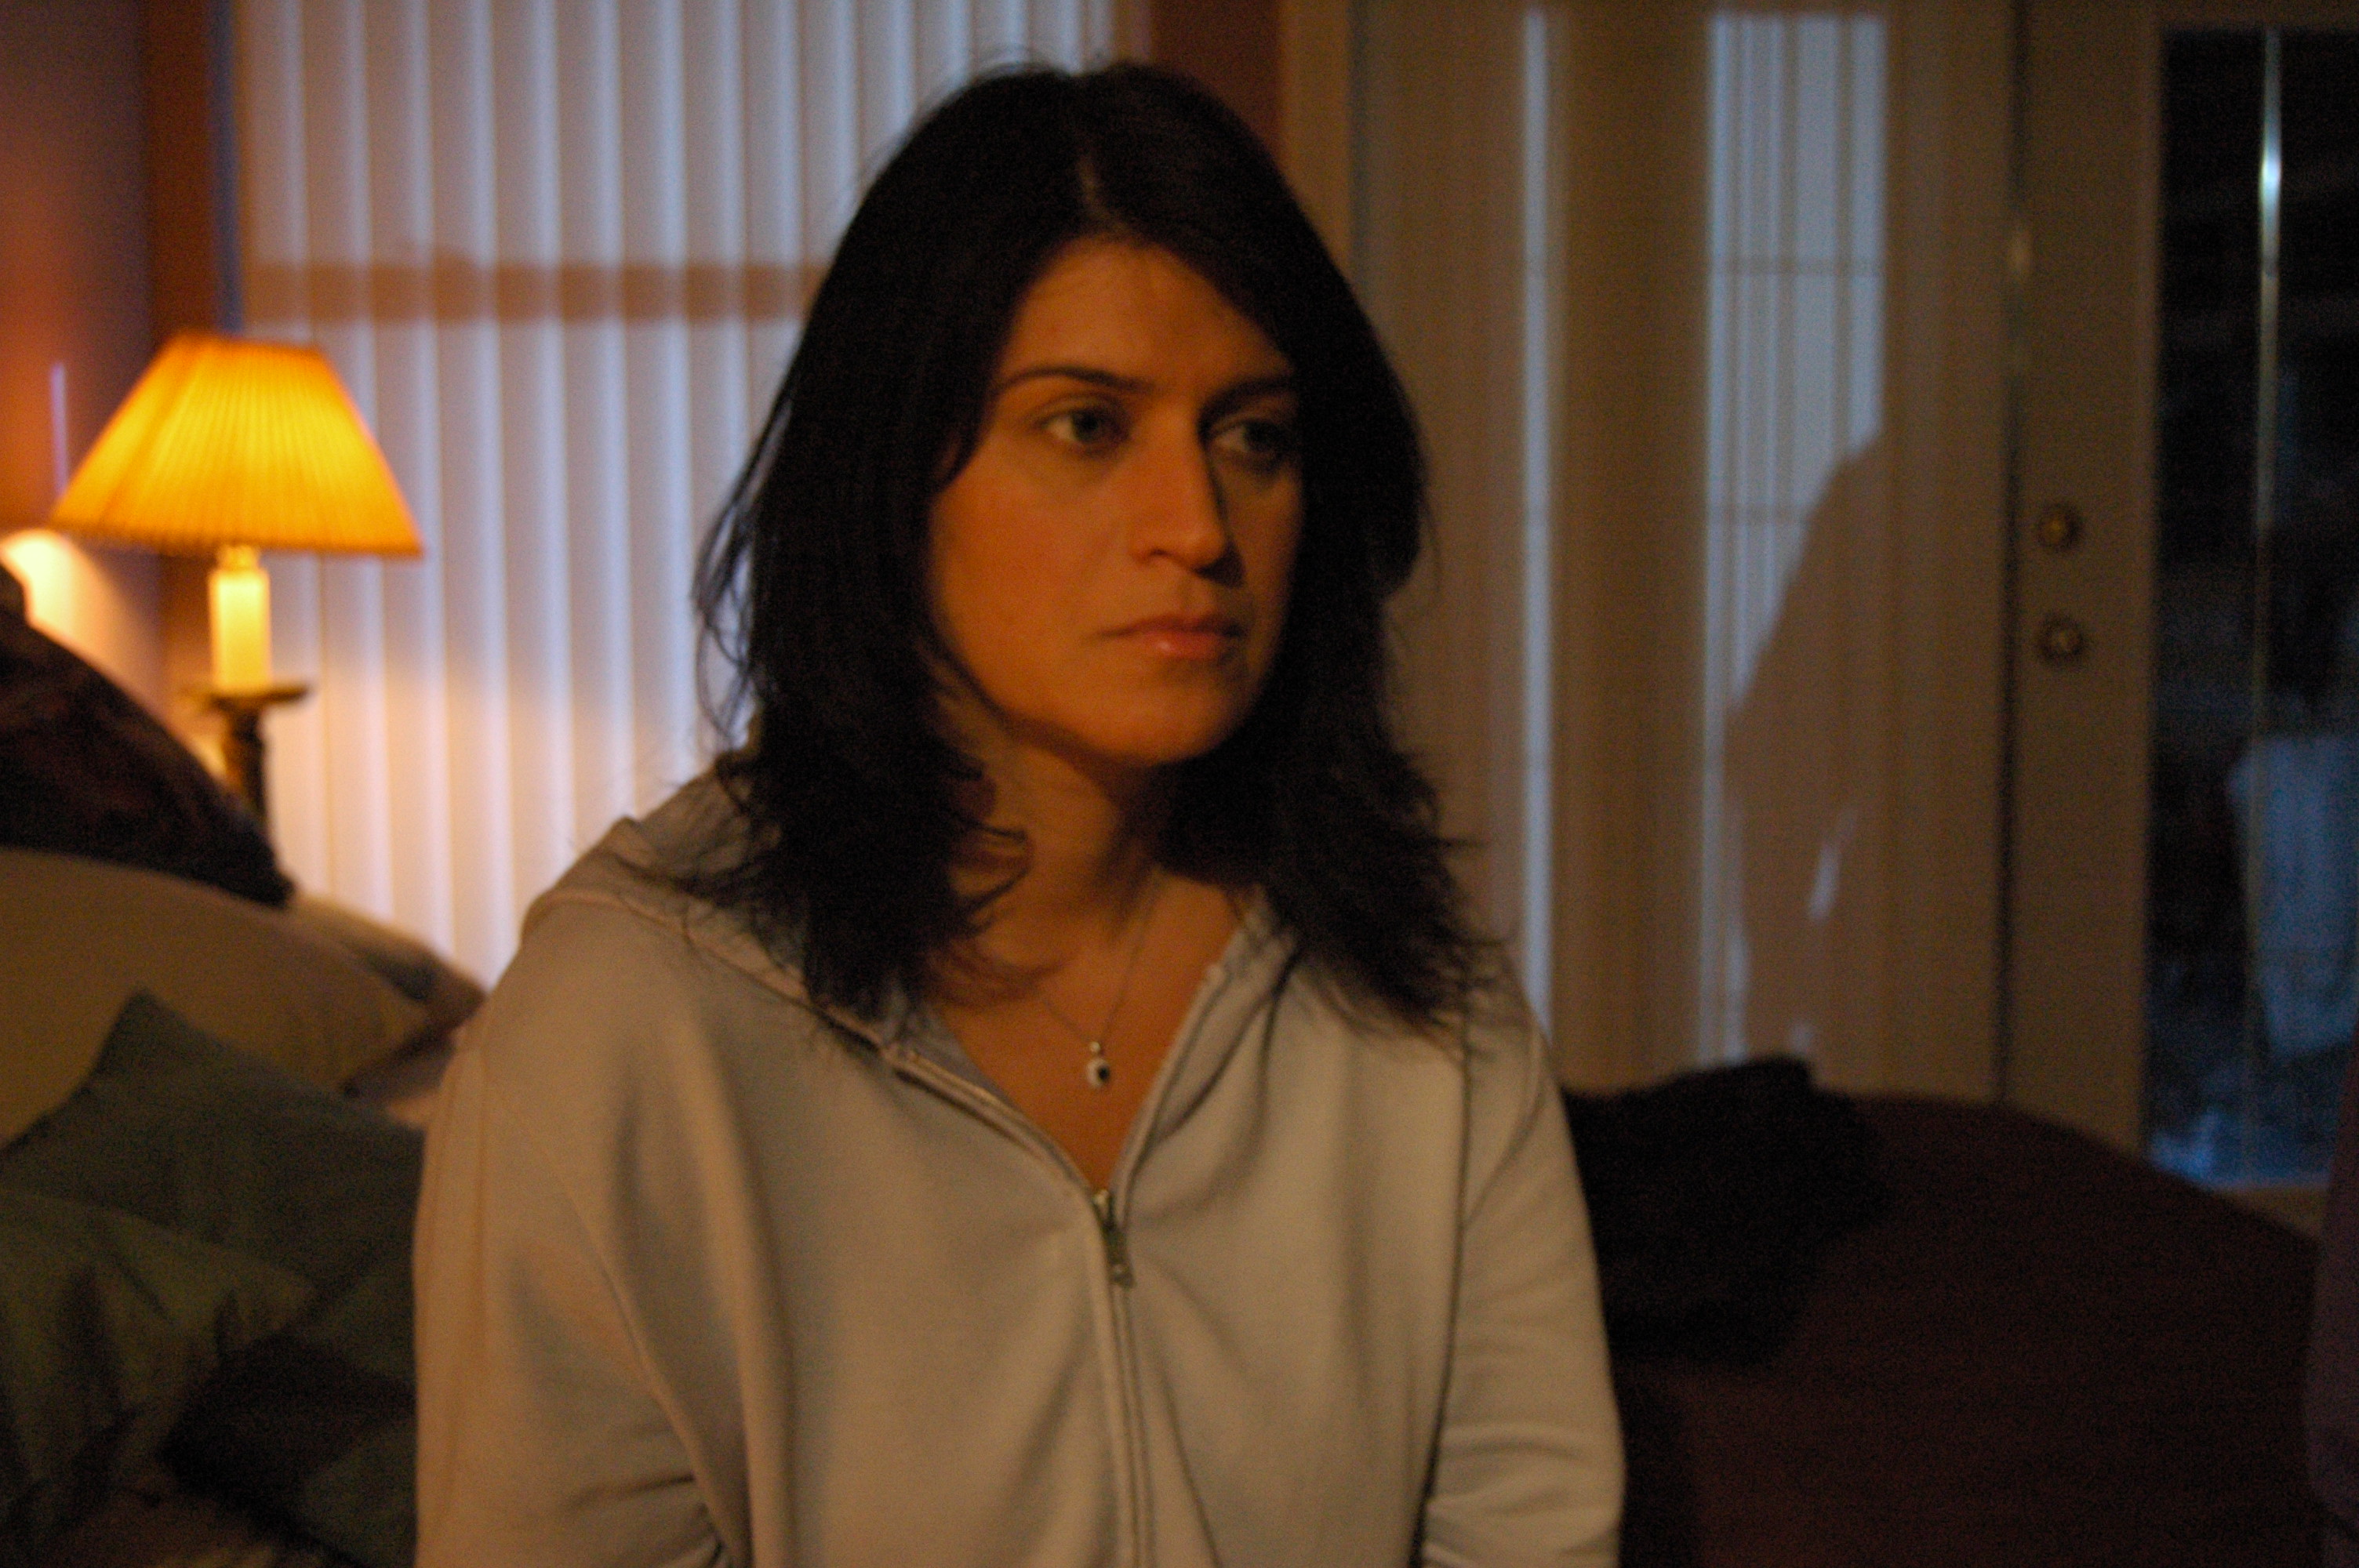 Iris Paluly as Anne in the short film 